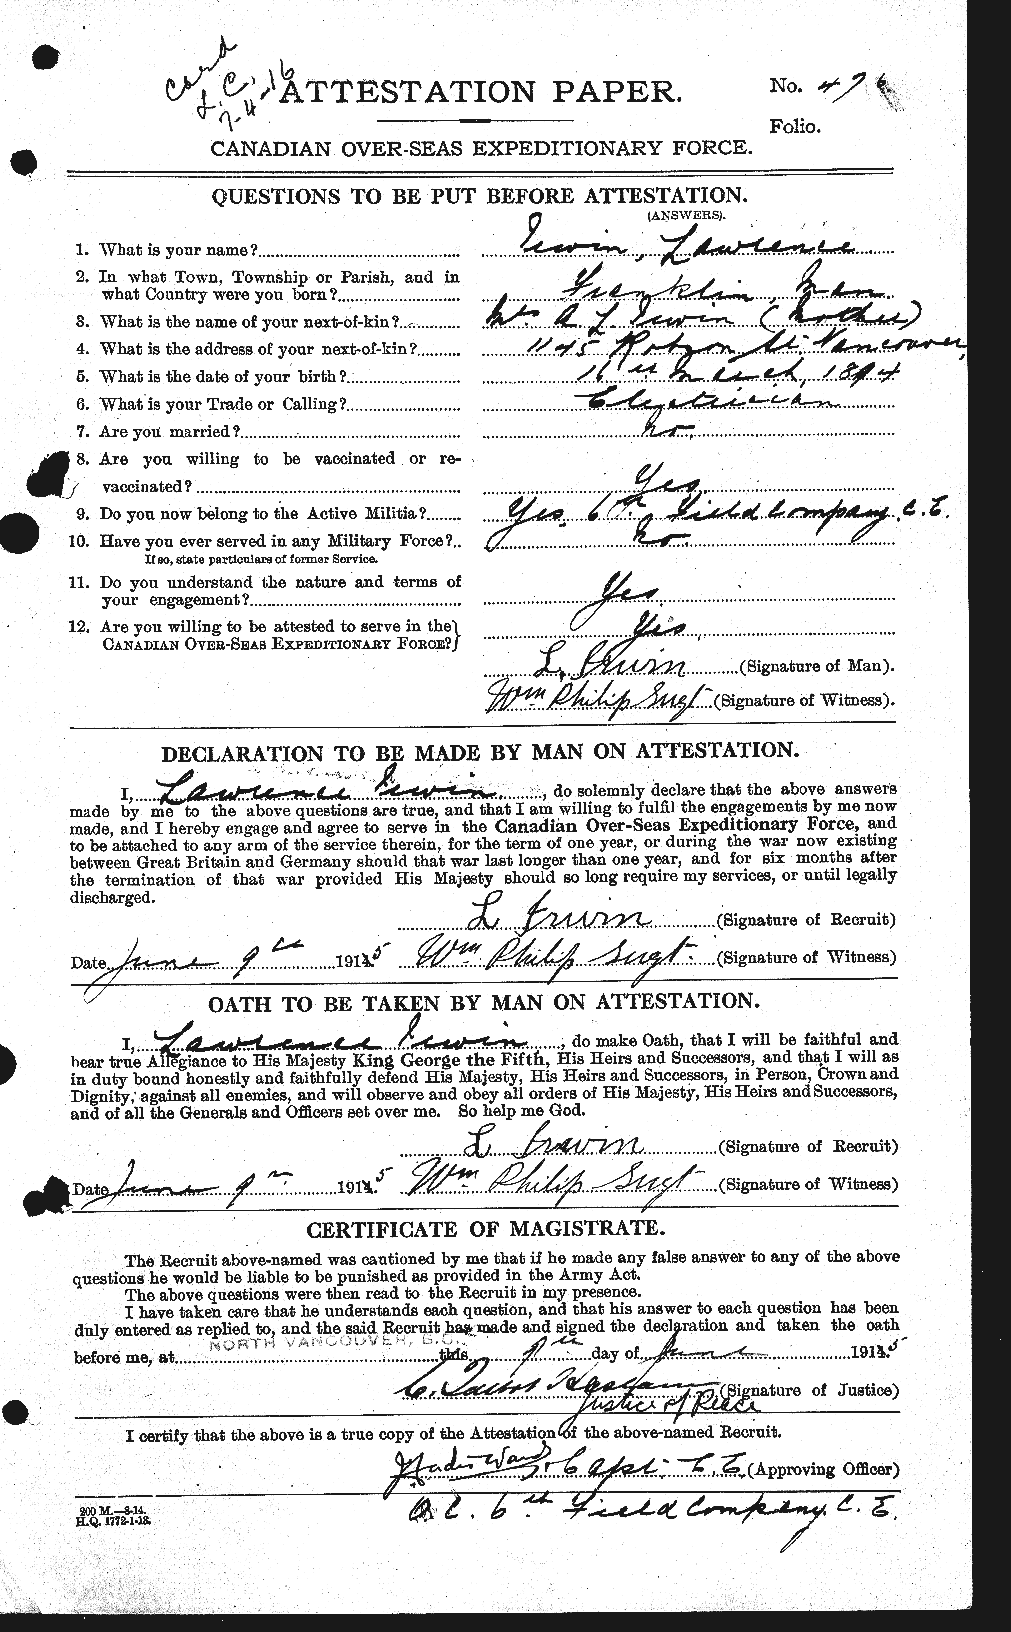 Personnel Records of the First World War - CEF 412950a